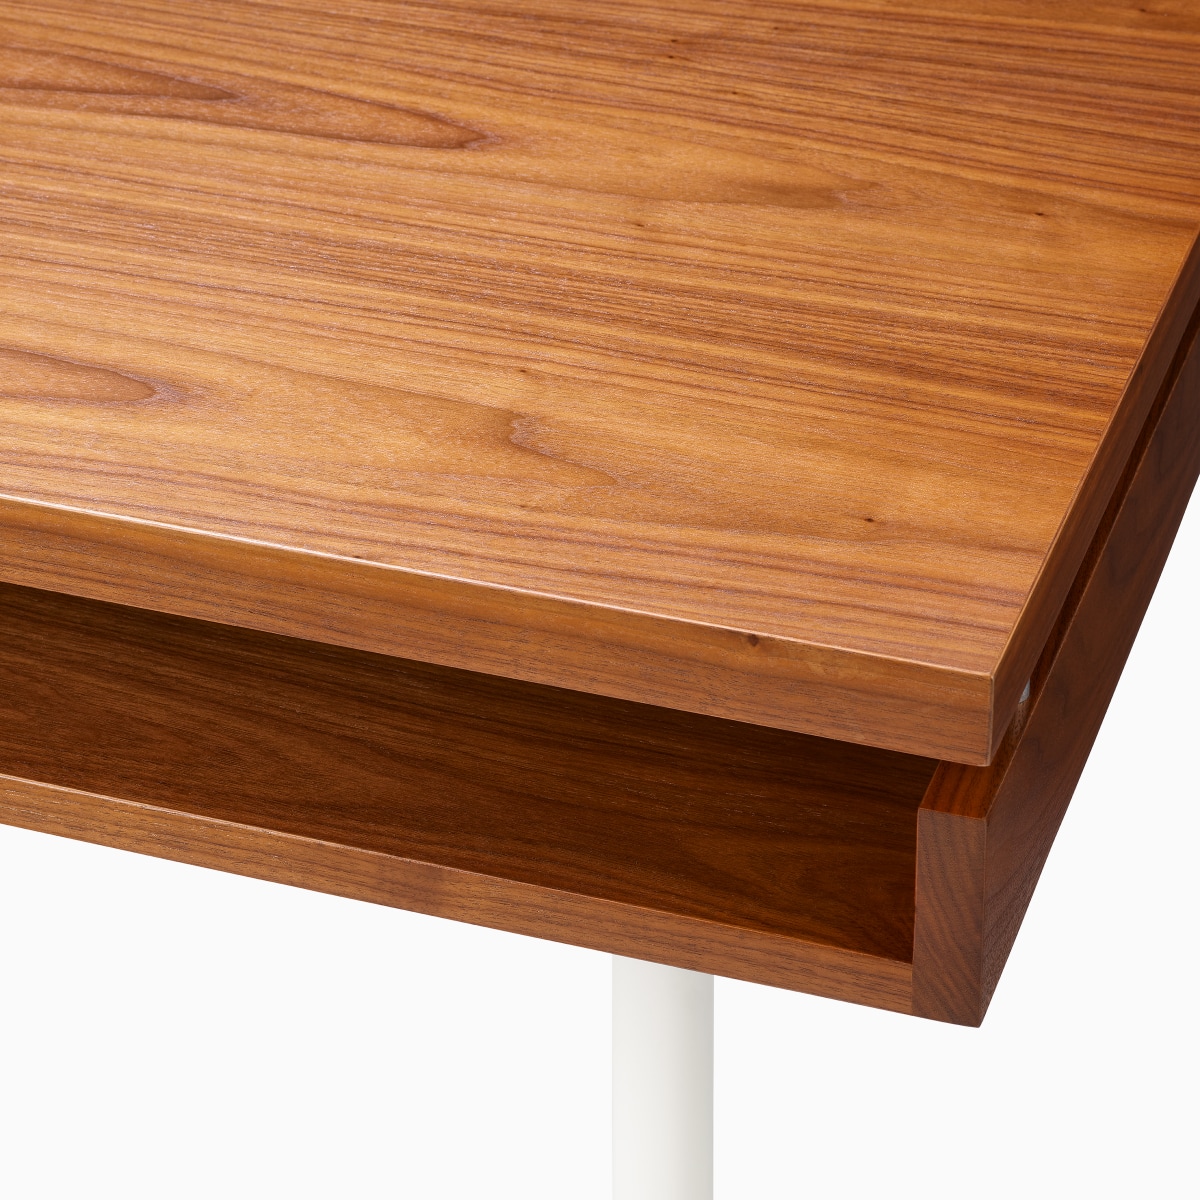 Detail of the secondary storage shelf of the Eames 2500 Series Executive Desk in walnut